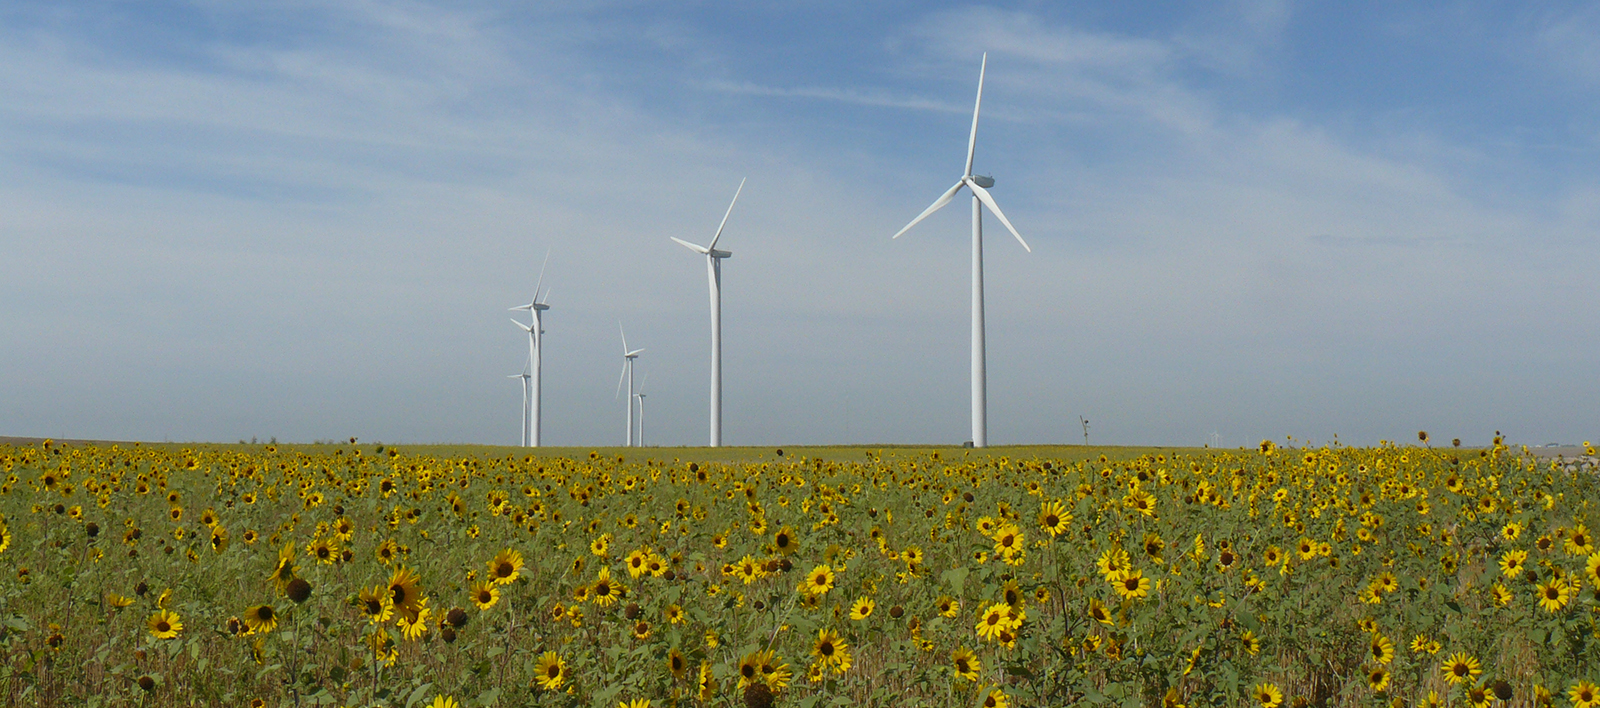 Wind Turbines in a field of sunflowers are maintained and repaired by graduates on Northeastern's Wind Technology program.